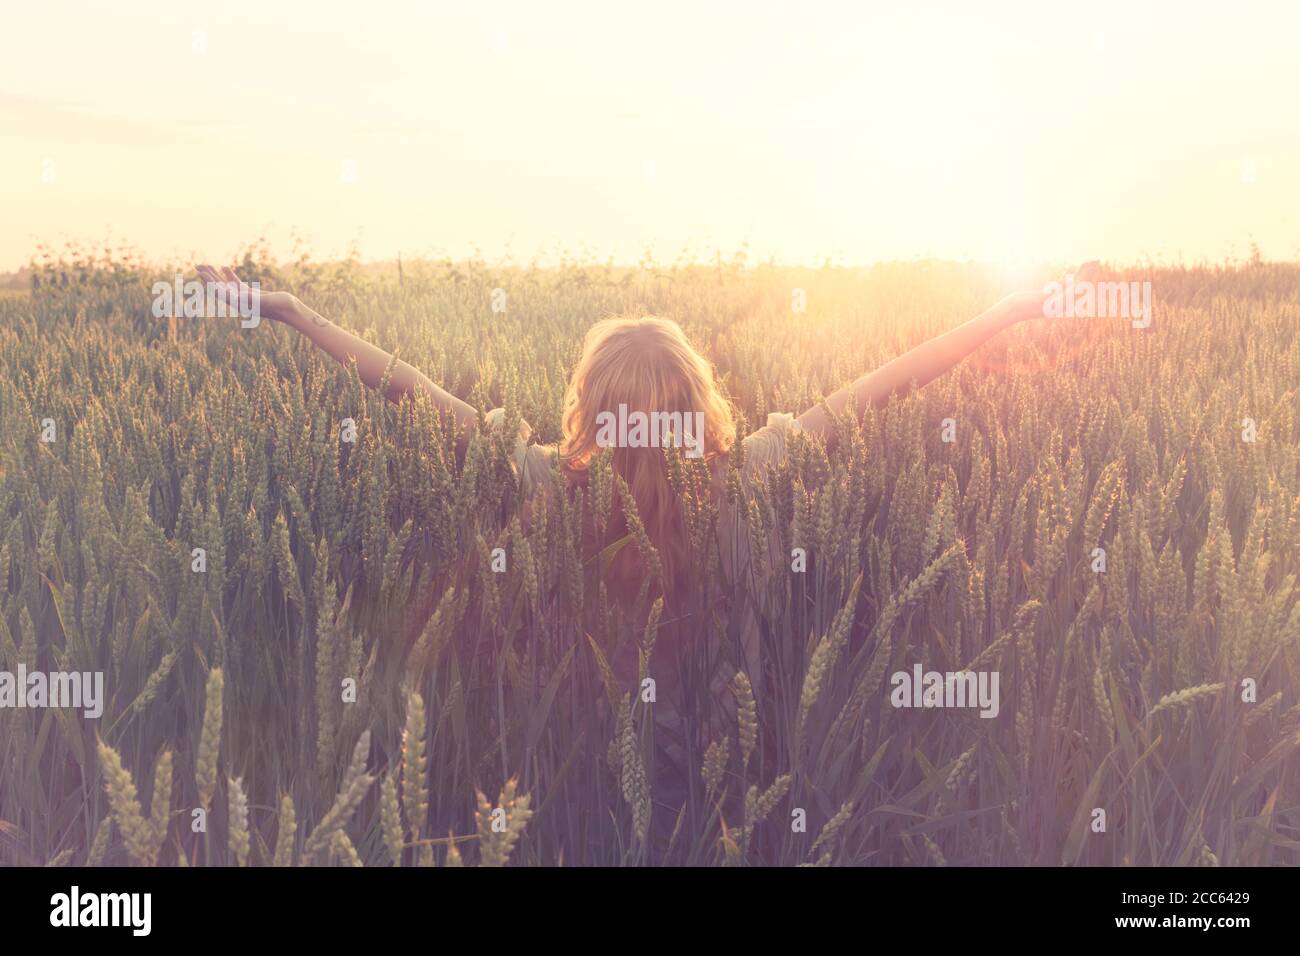 Welcome new day, woman with raised arms embraces the sun Stock Photo